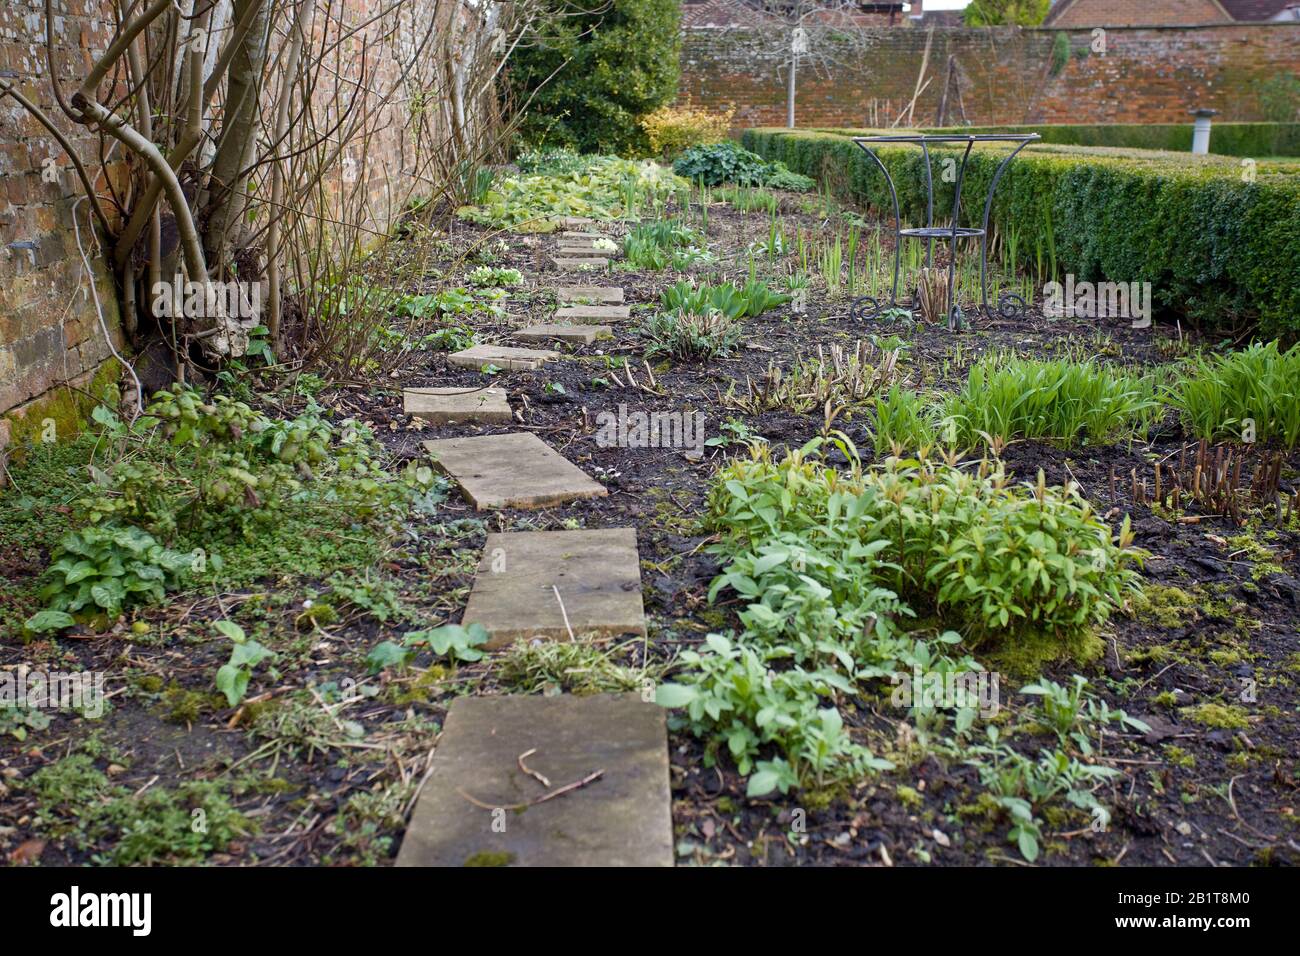 Variety of new bulbs and perennials growing in deep bed in garden Stock Photo